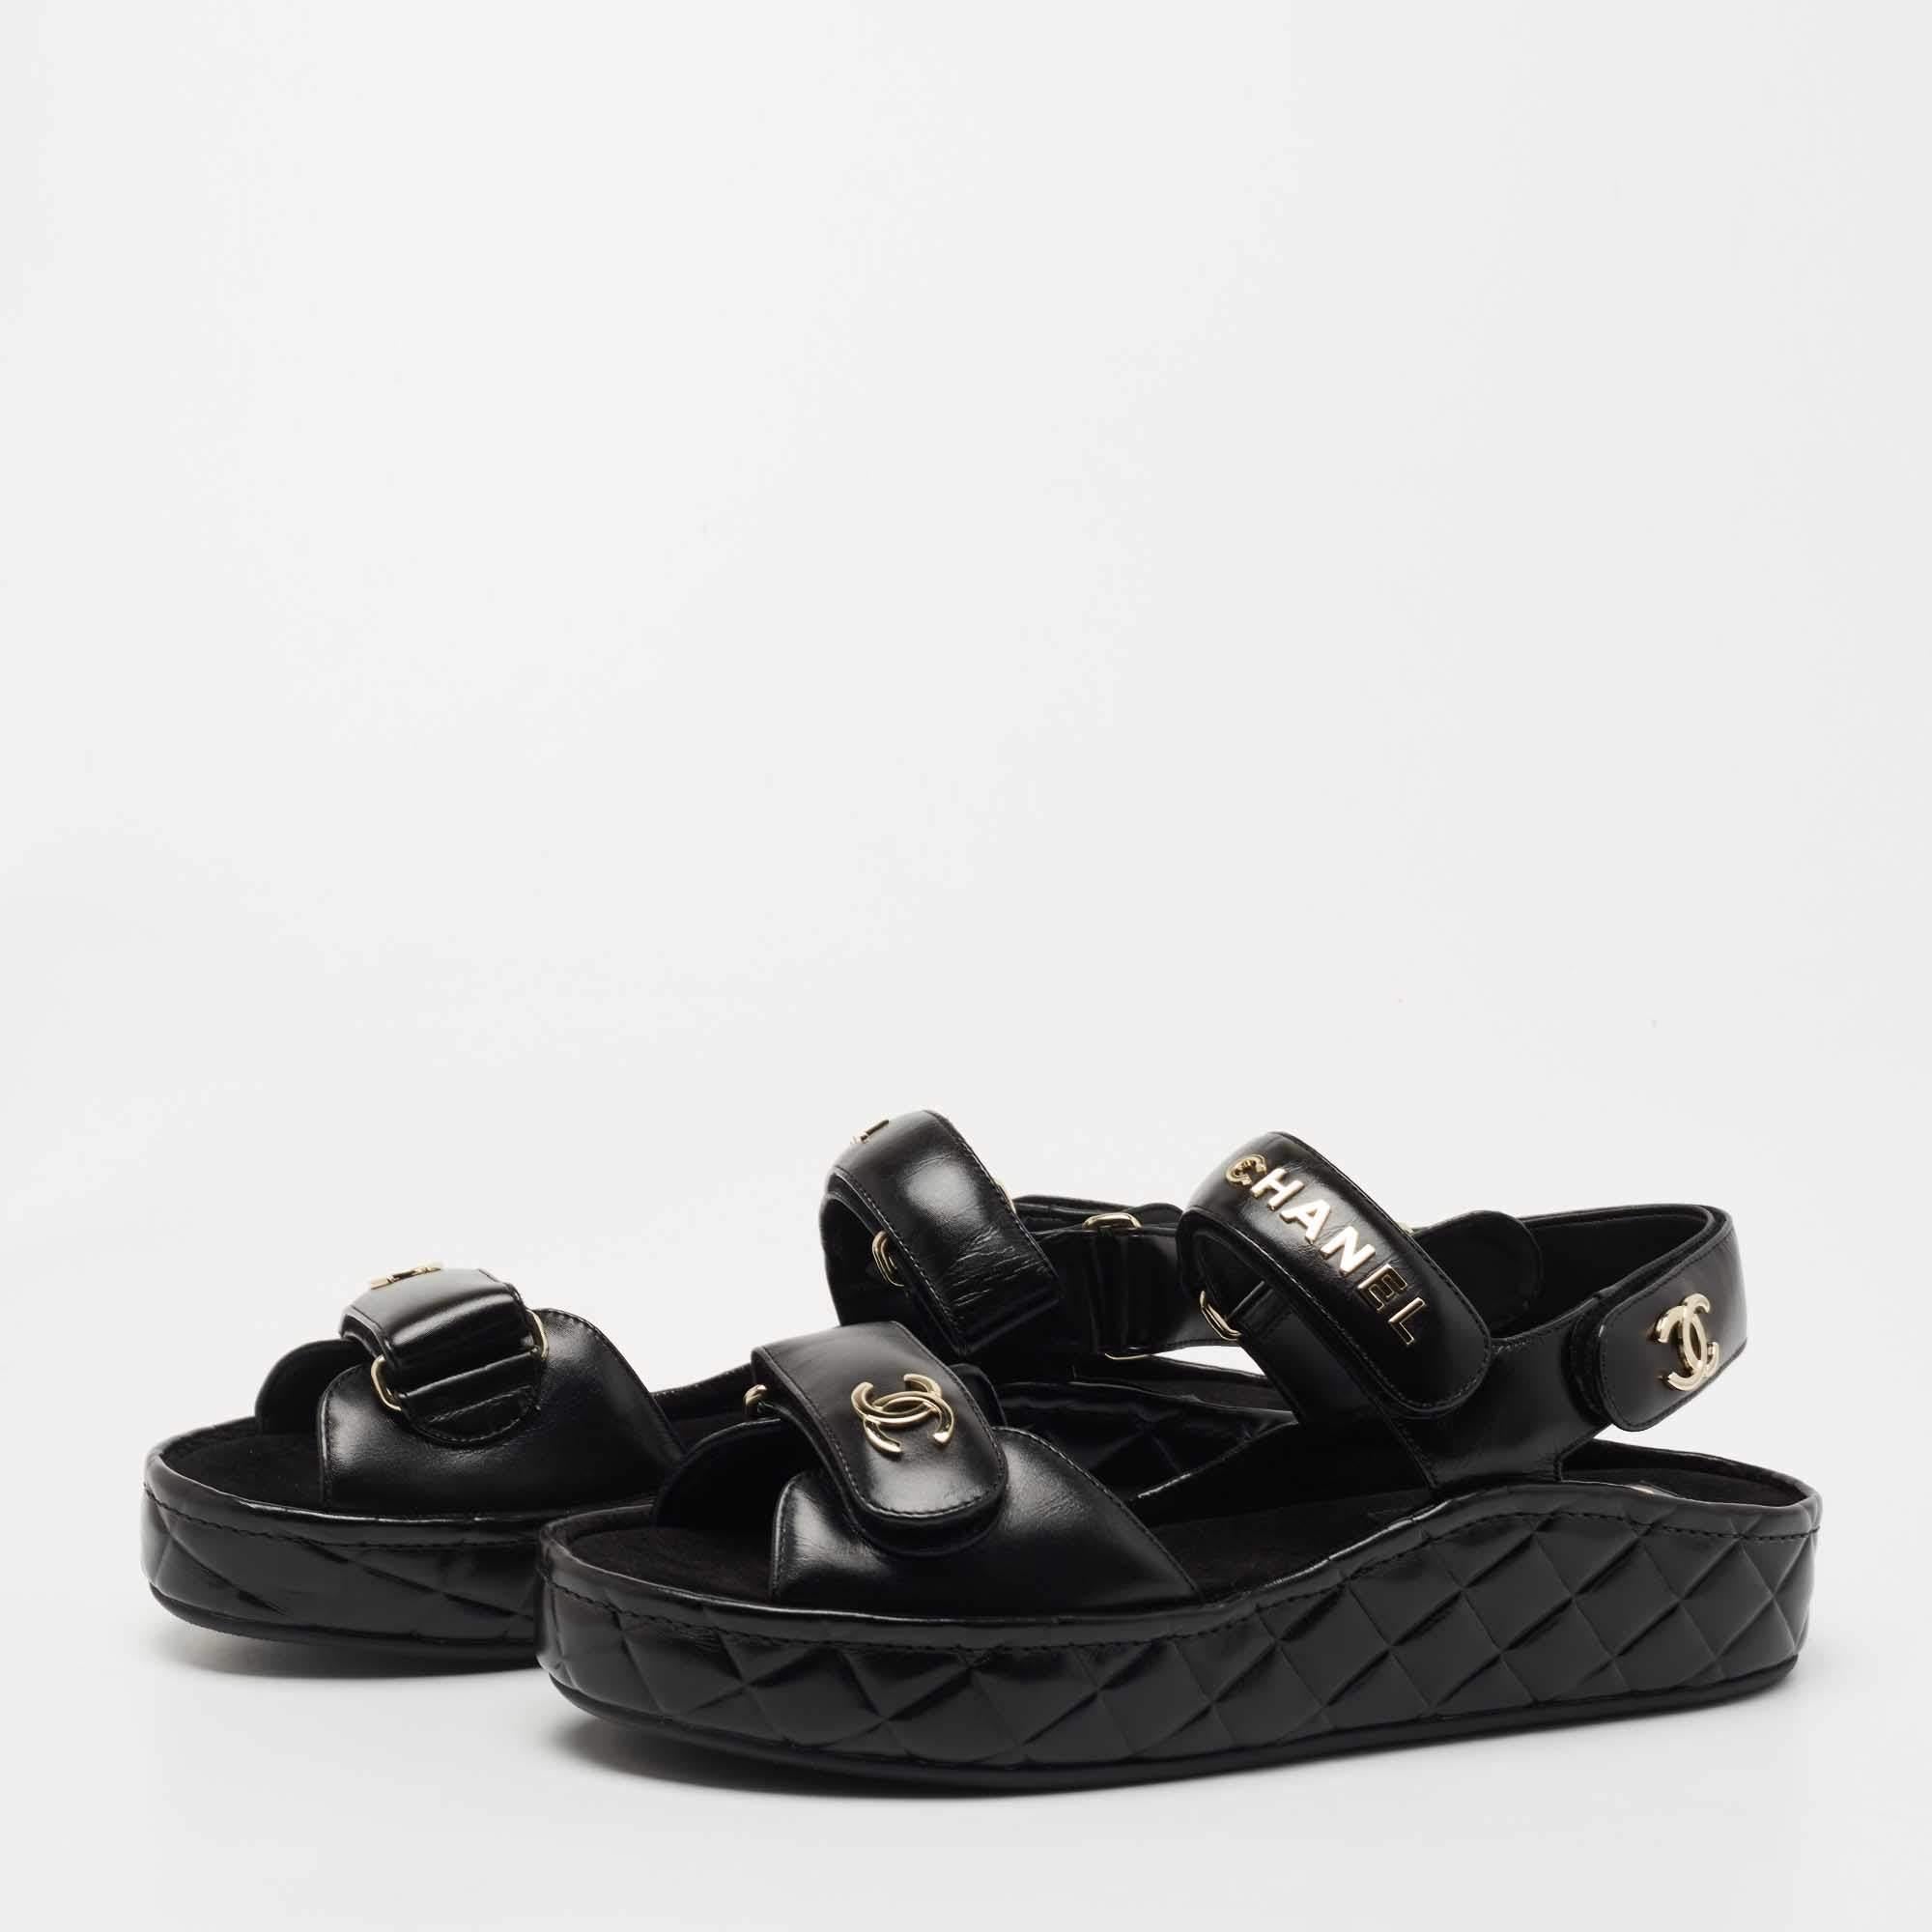 Dad sandals leather sandal Chanel Black size 38 EU in Leather